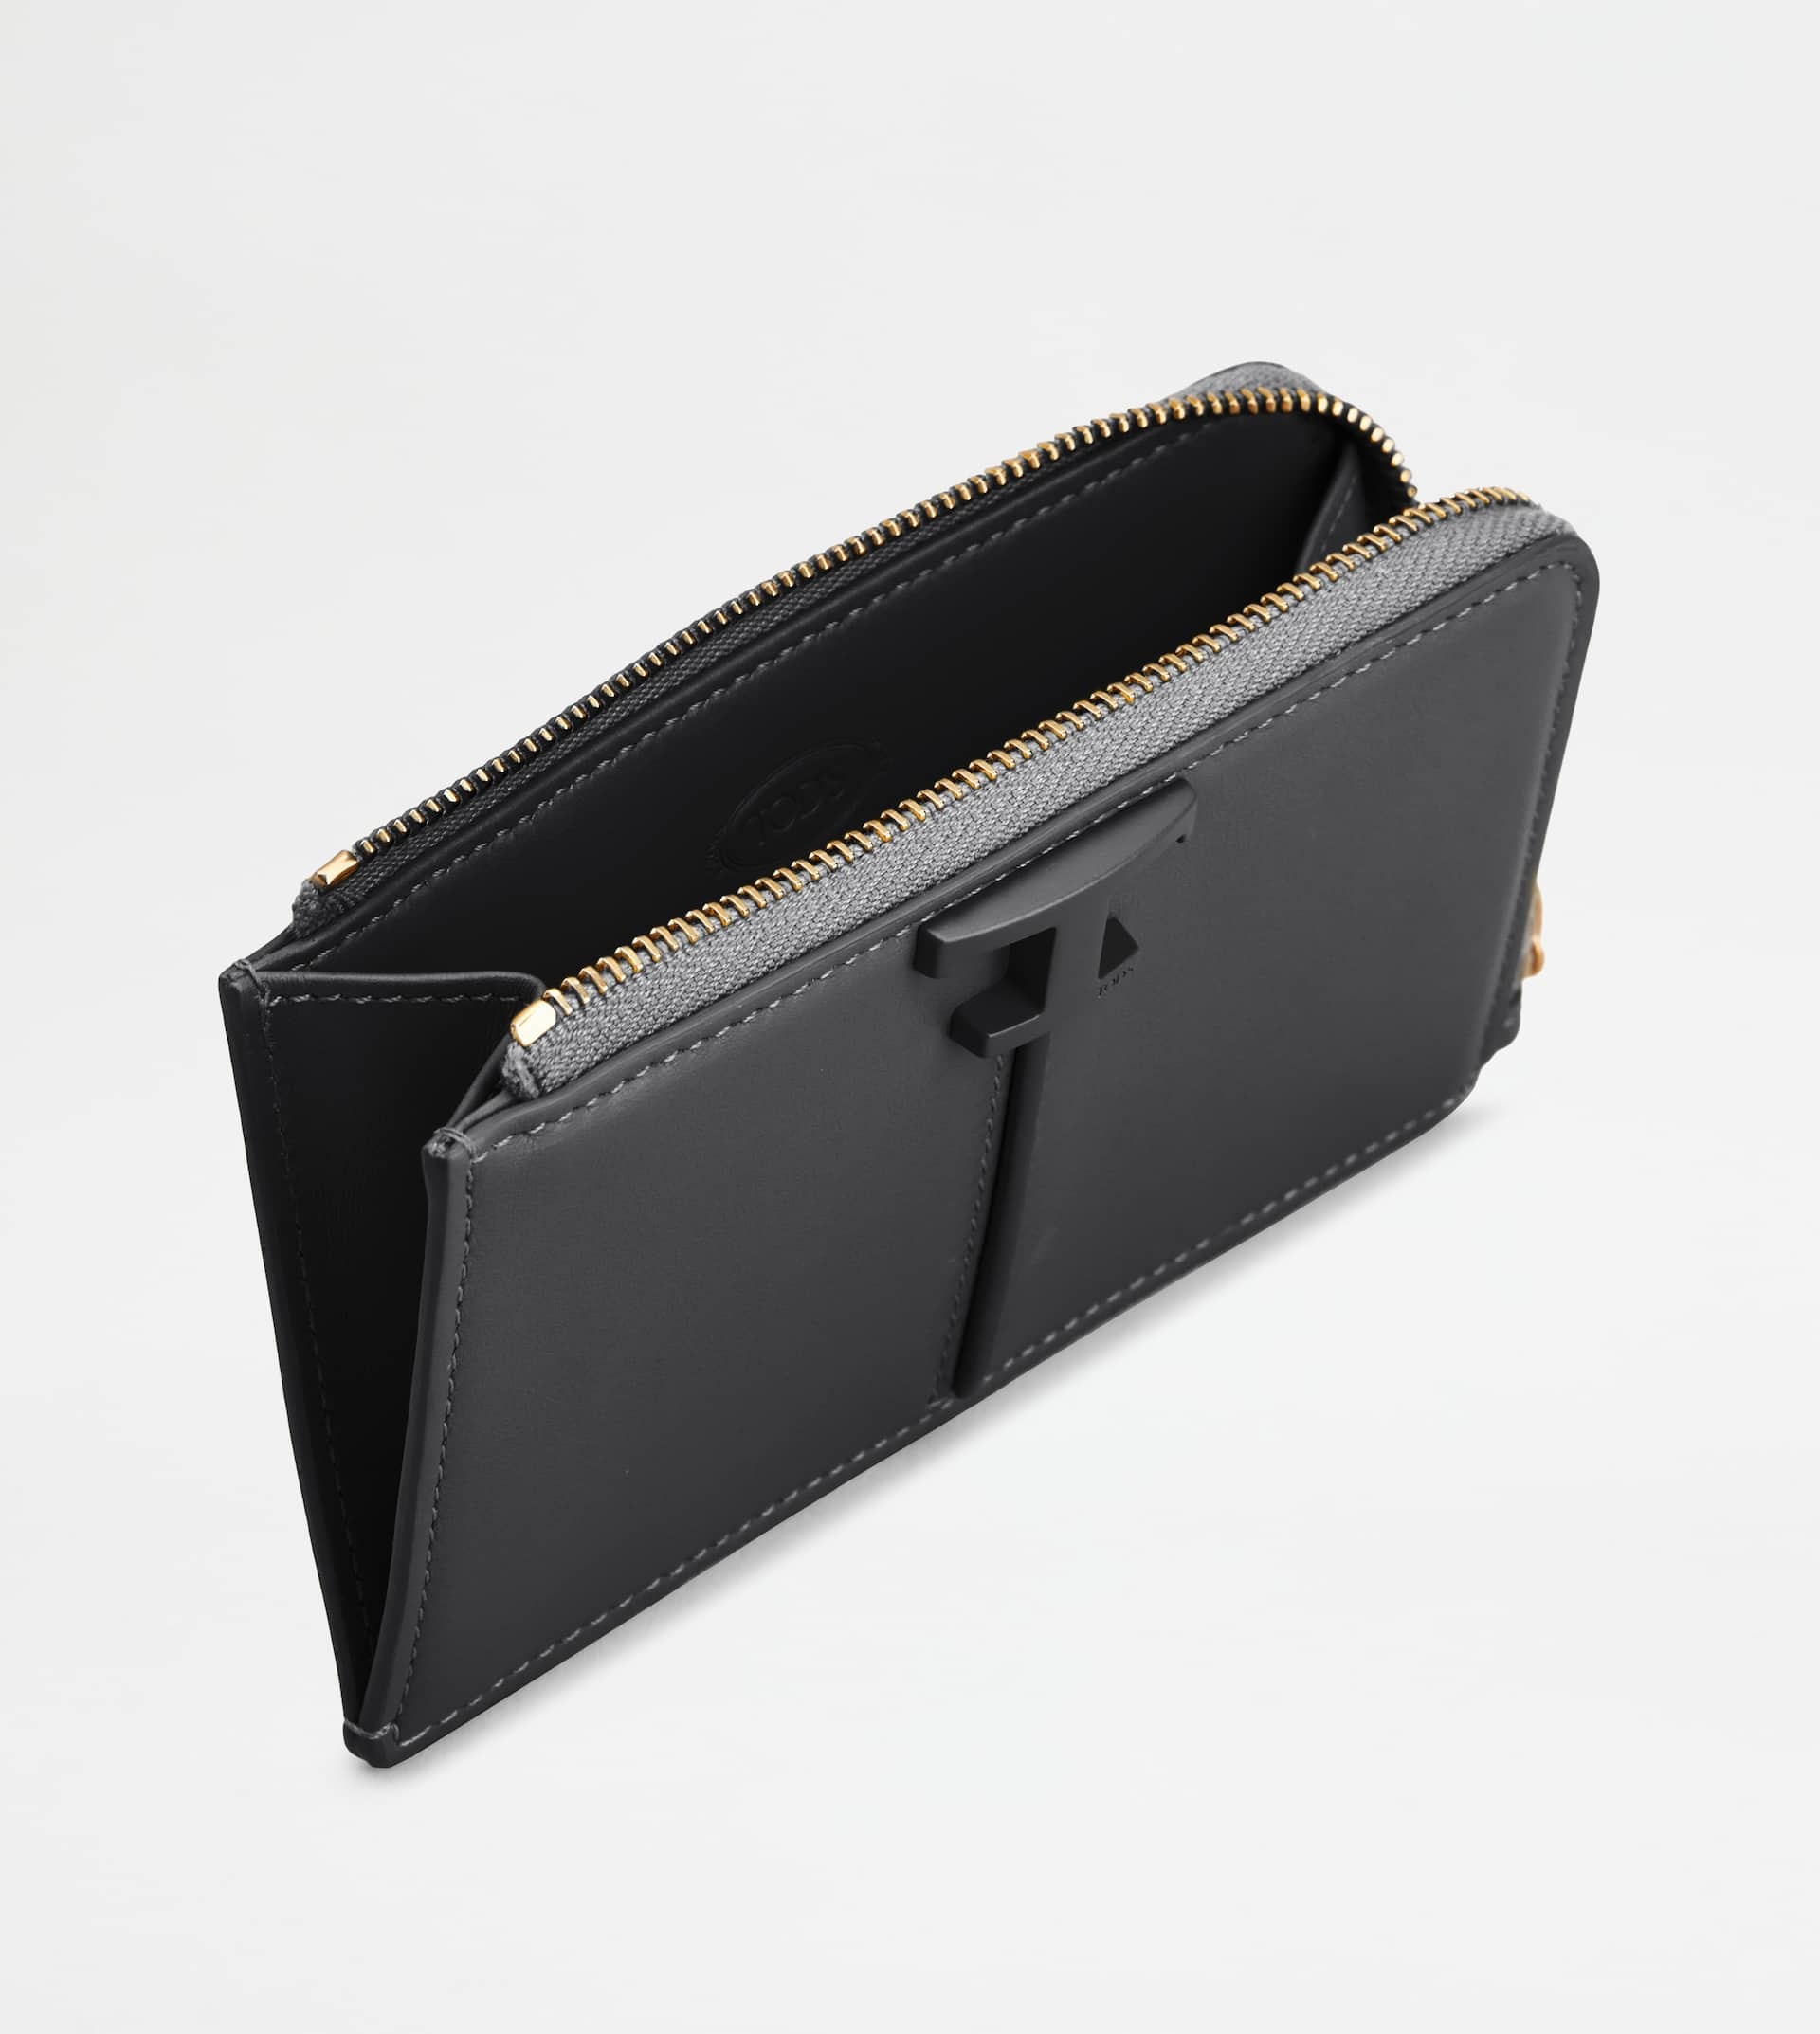 T TIMELESS KEY POUCH IN LEATHER - BLACK - 2